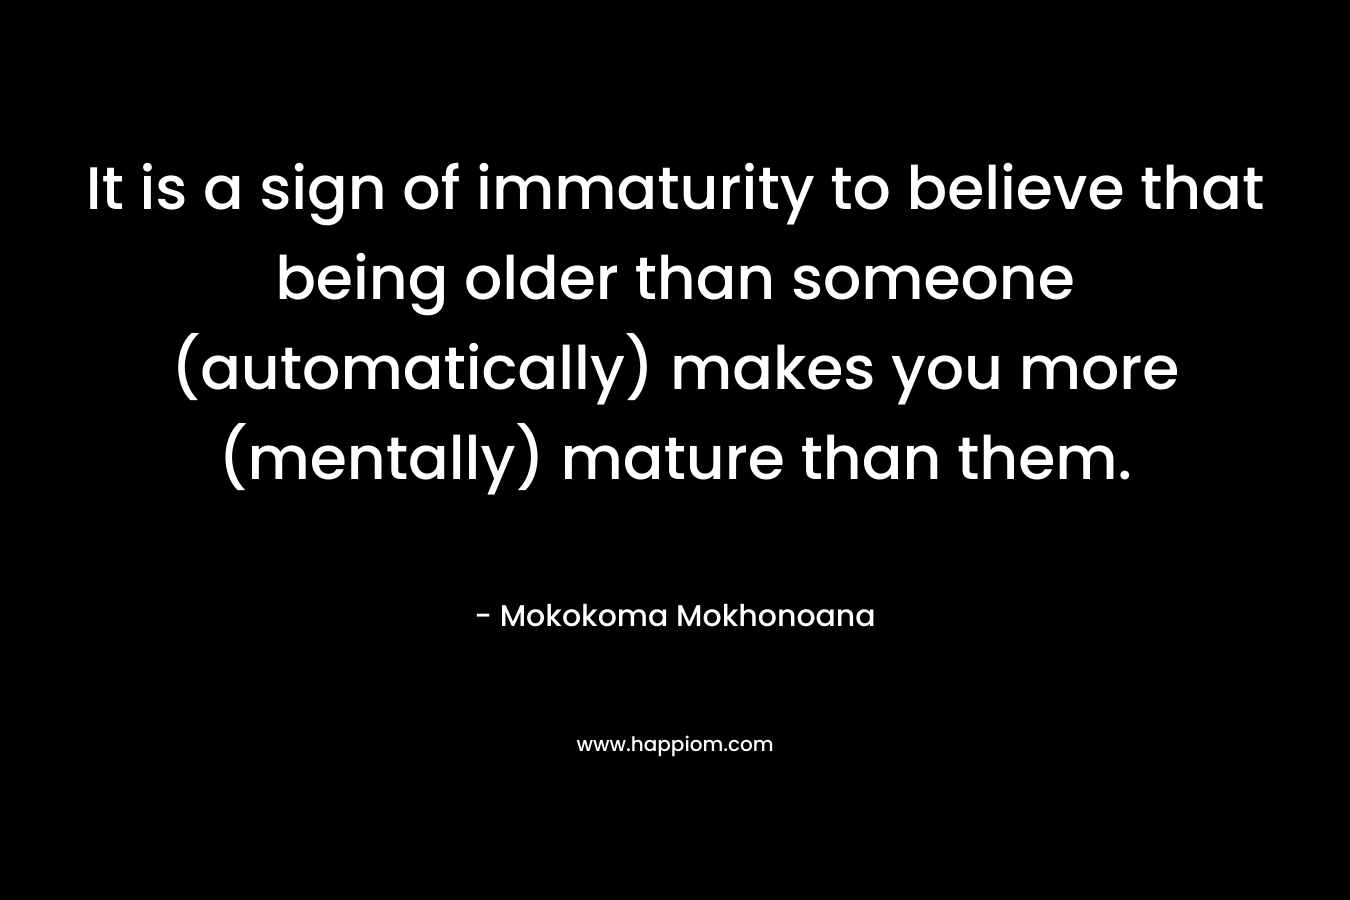 It is a sign of immaturity to believe that being older than someone (automatically) makes you more (mentally) mature than them. – Mokokoma Mokhonoana